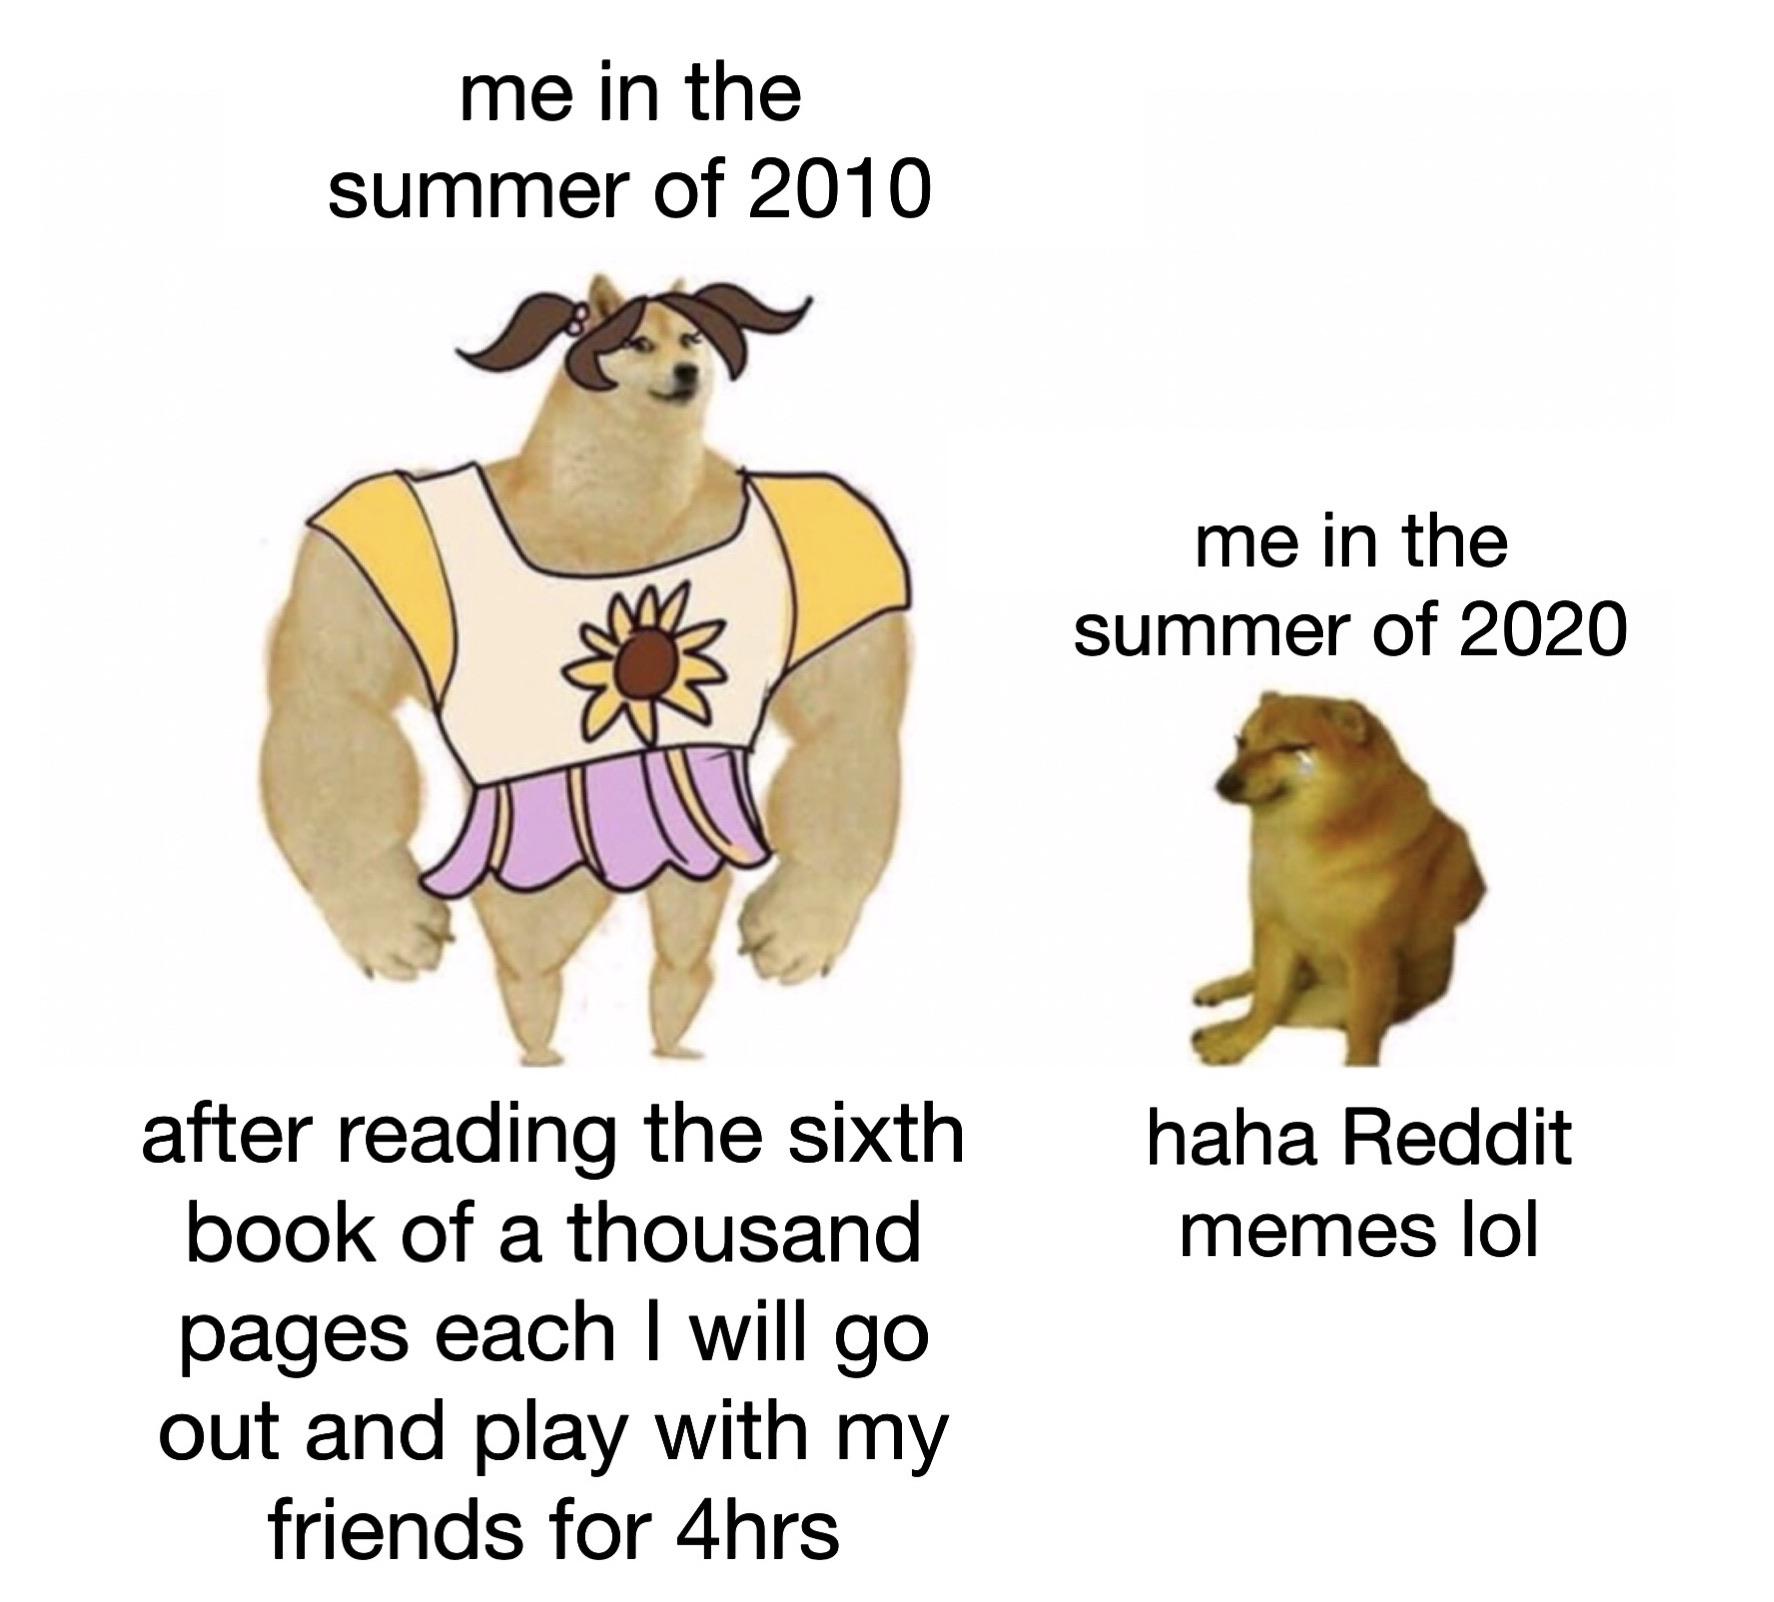 Depression,  depression memes Depression,  text: me in the summer of 2010 after reading the sixth book of a thousand pages each I will go out and play with my friends for 4hrs me in the summer of 2020 haha Reddit memes Iol 